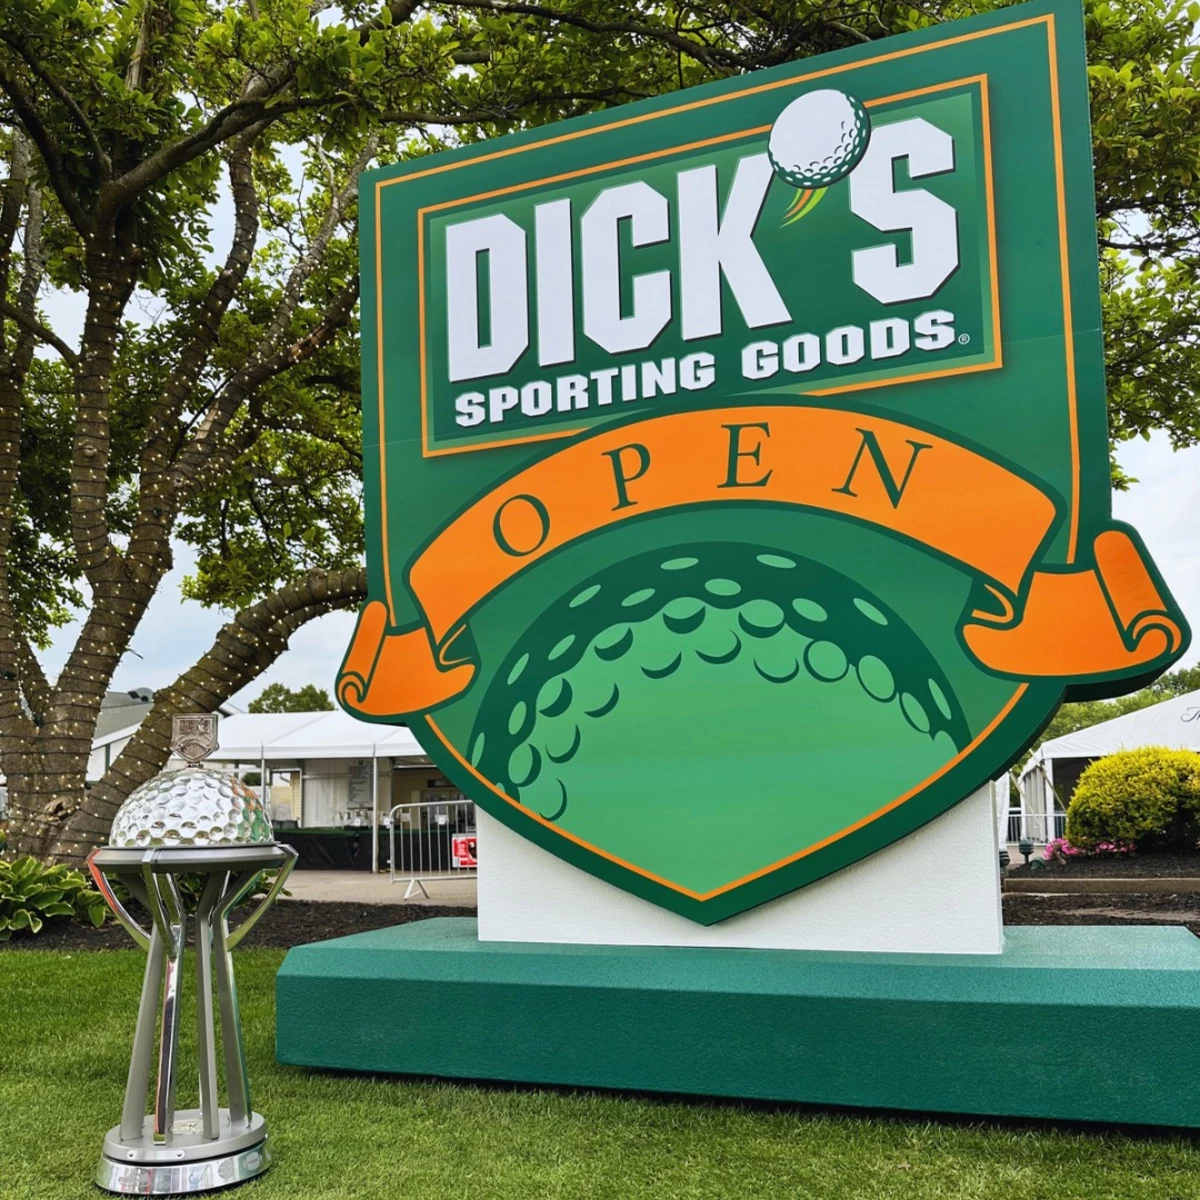 Dick's Sporting Goods hosts grand opening this weekend, Local News